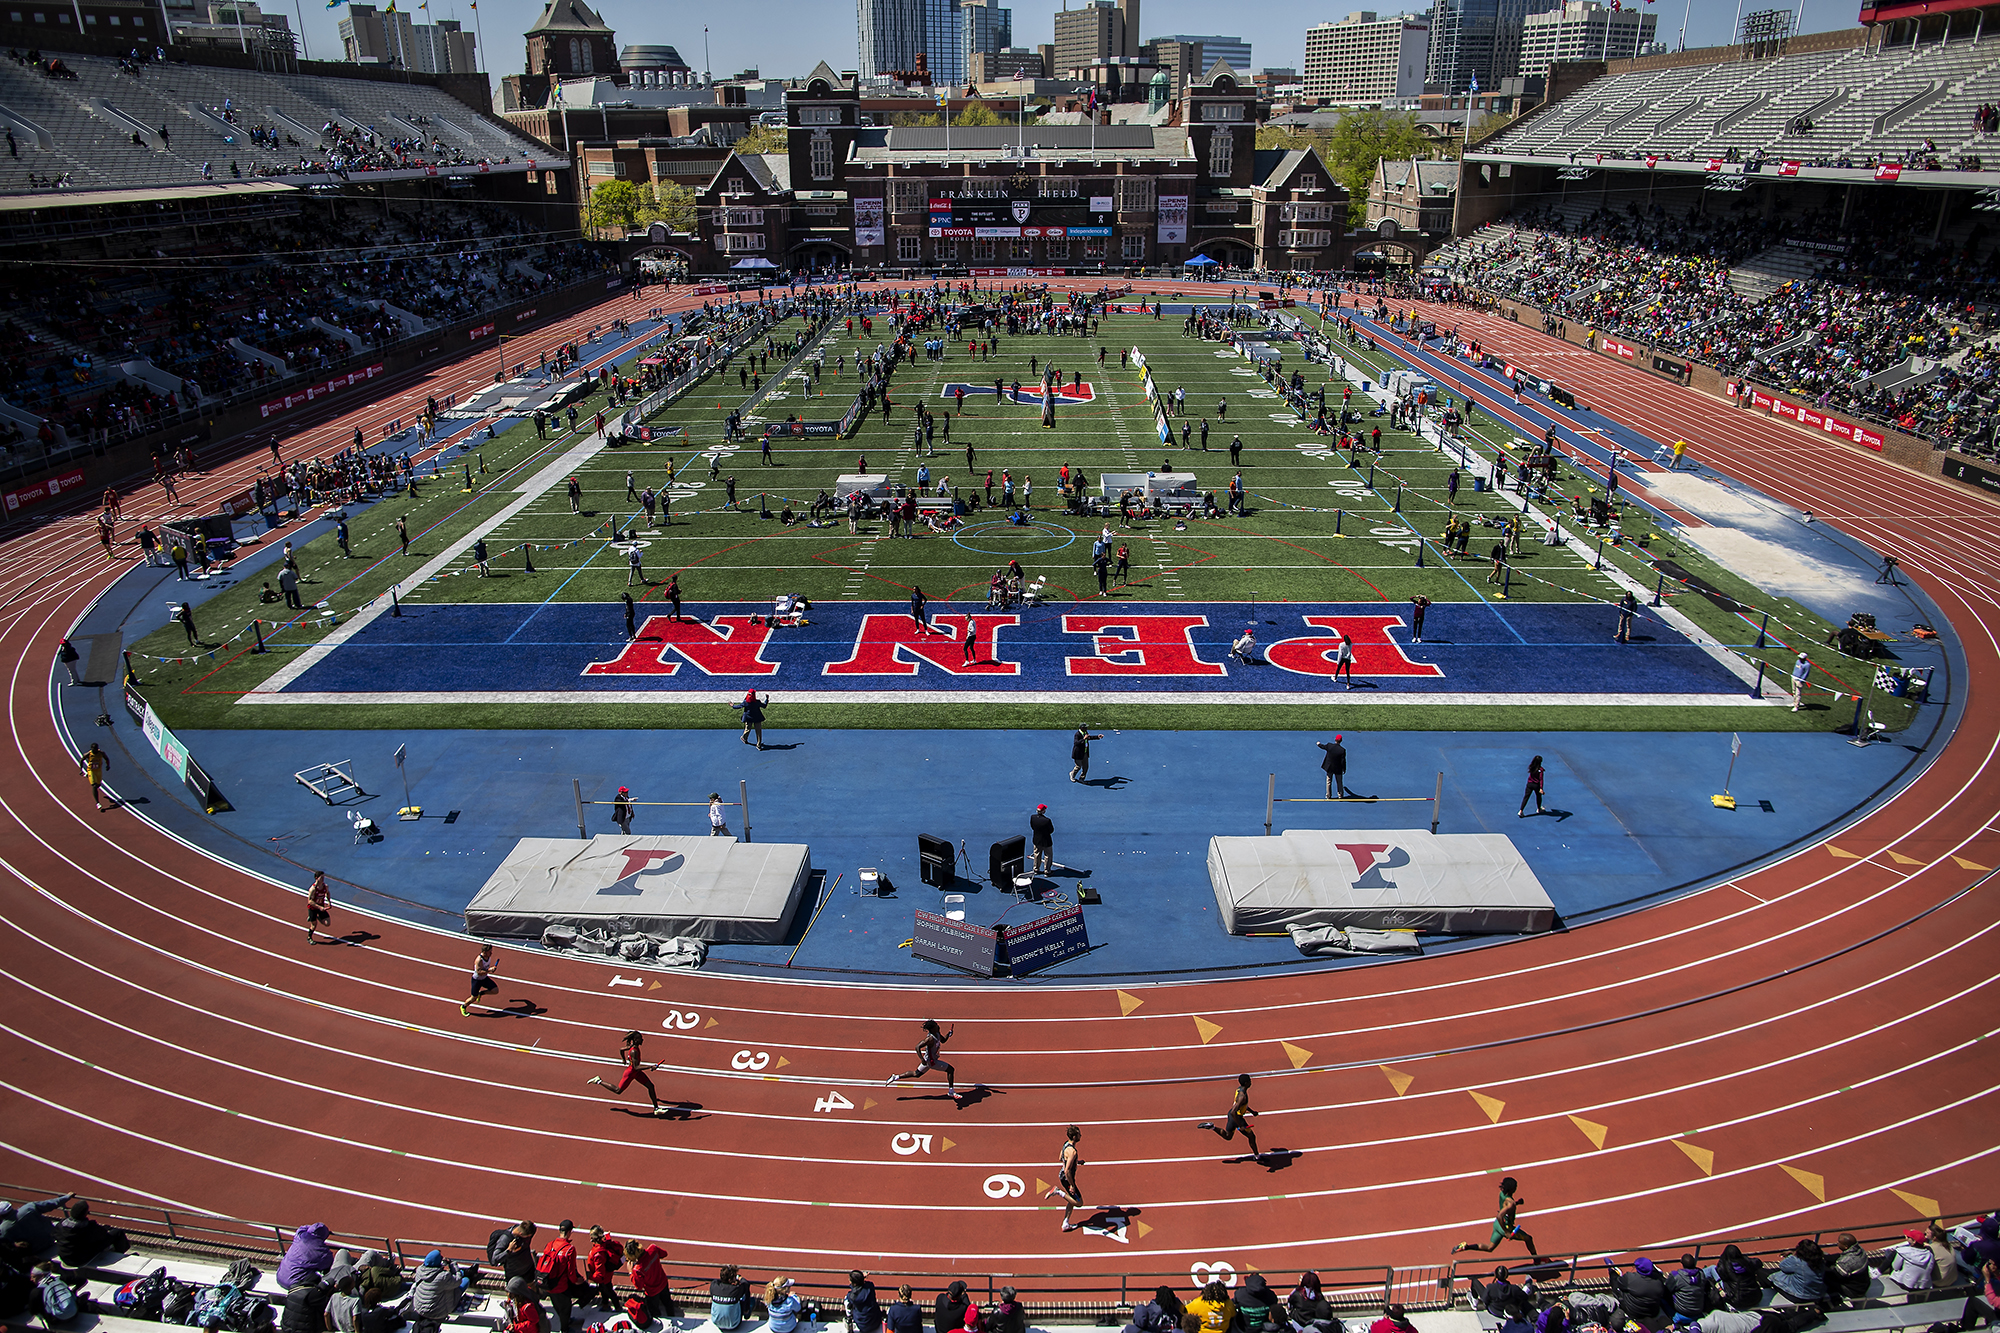 Full view of Penn’s Franklin Field with runners running on the track.